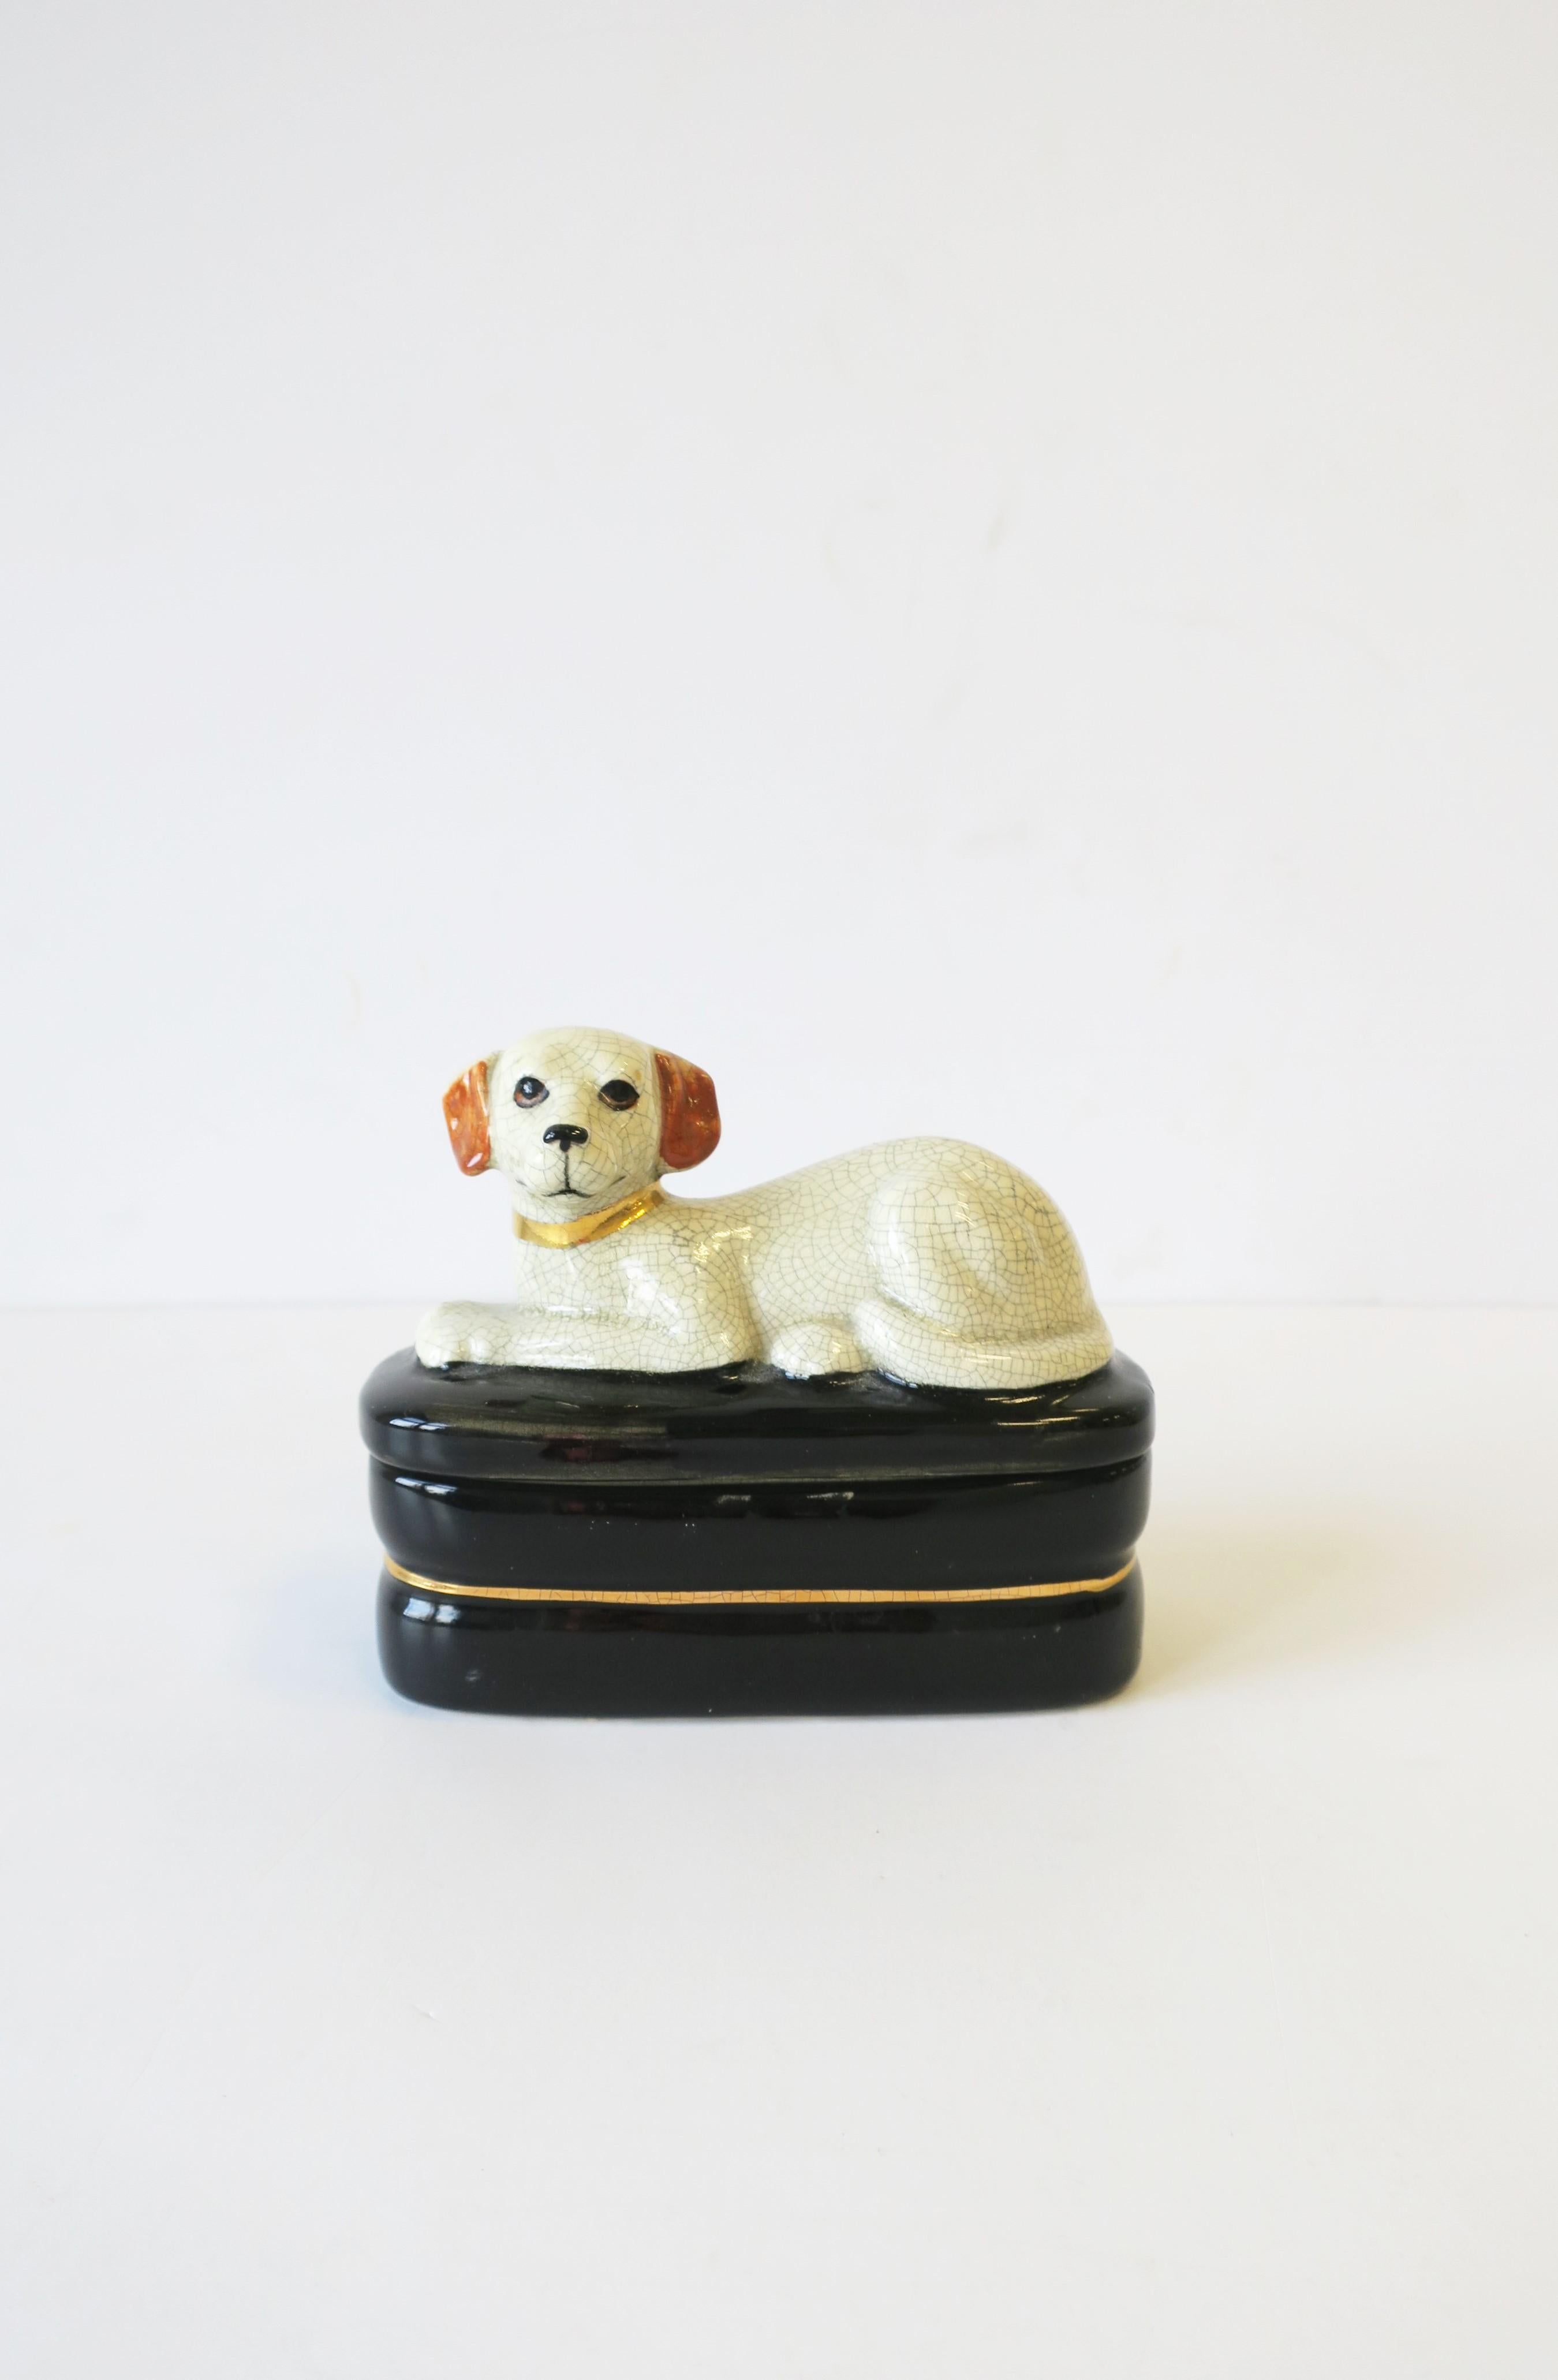 A ceramic retriever dog on pillow decorative box. Great as a standalone piece or to hold small trinket items or jewelry. Colors include: Off-white, black, gold, and touches of brown on ears. A great piece for a console, desk, vanity, nightstand